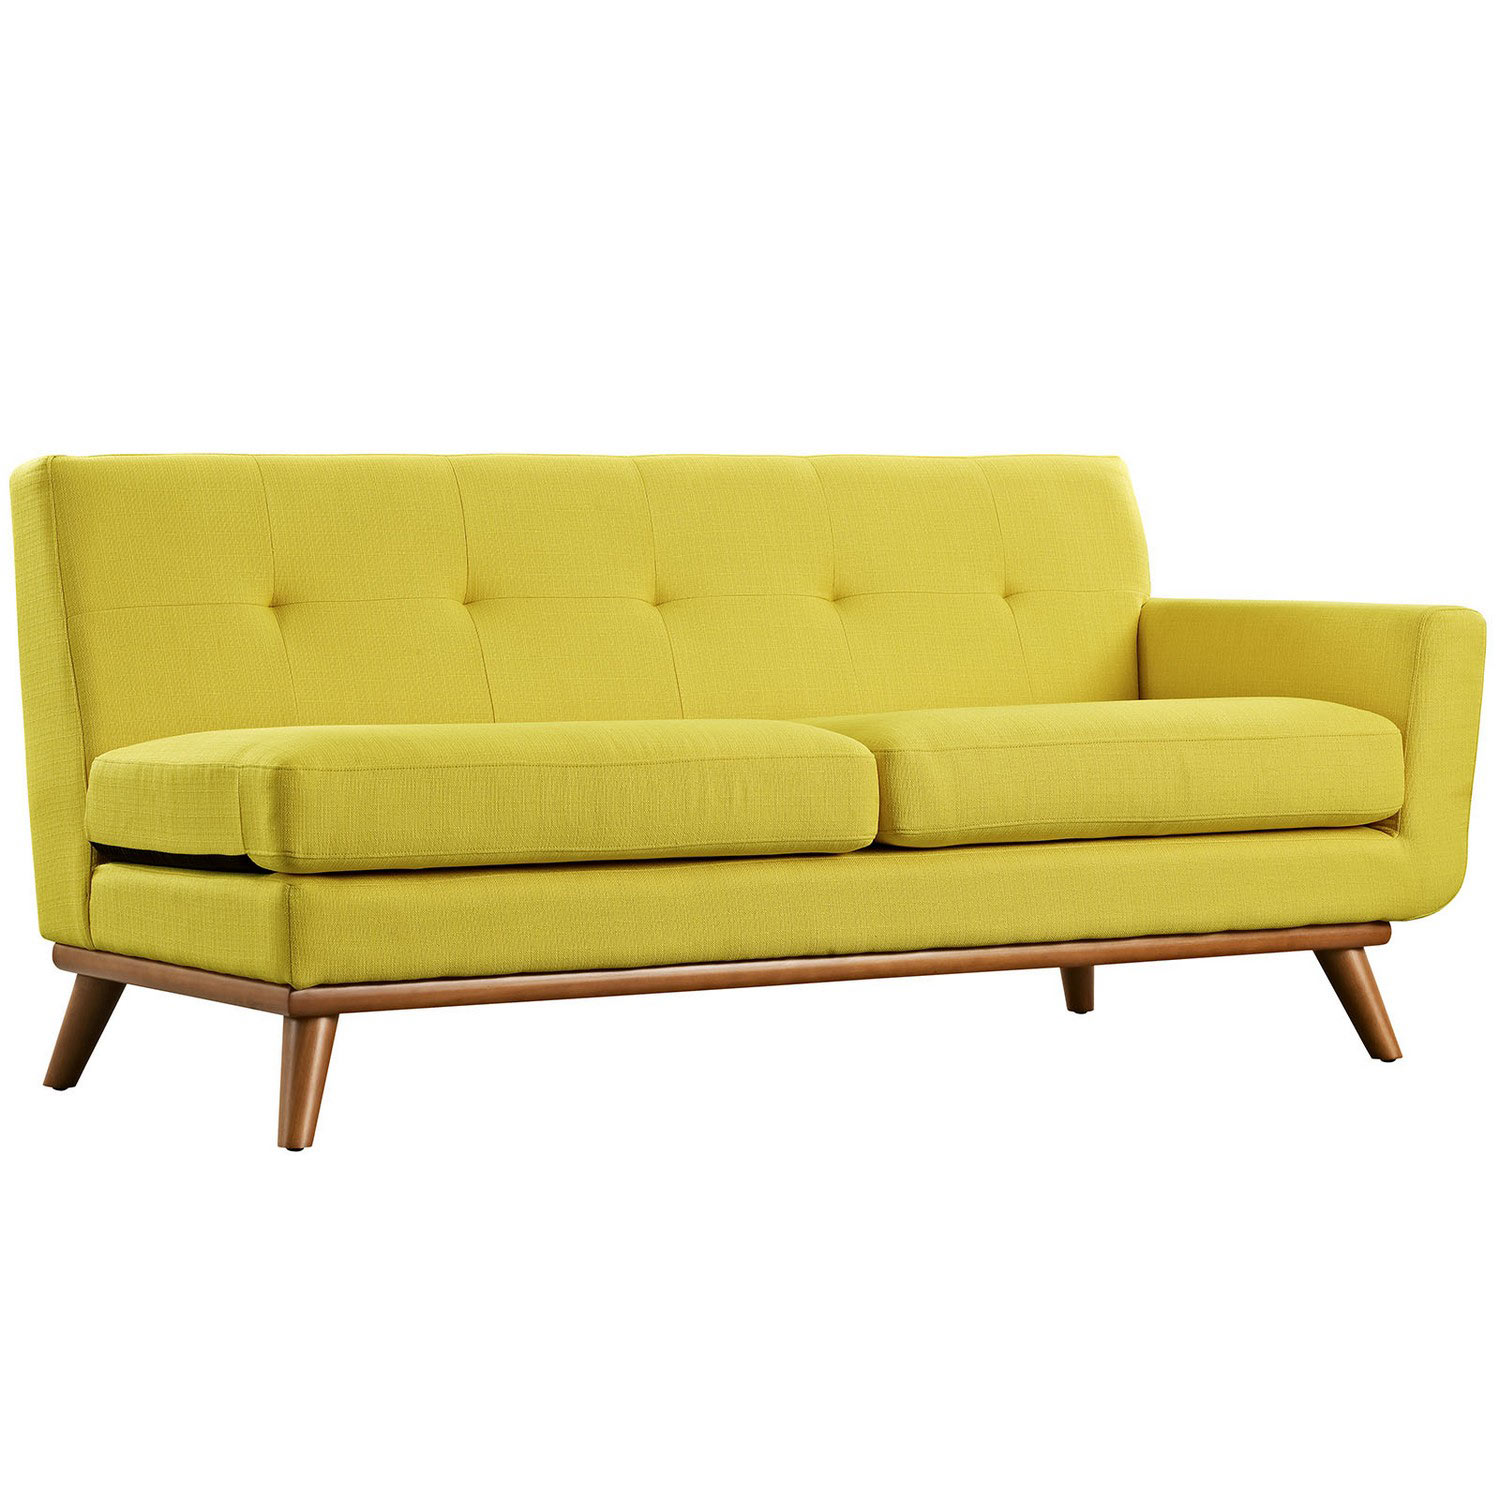 Modway Engage Right Arm Loveseat - Sunny